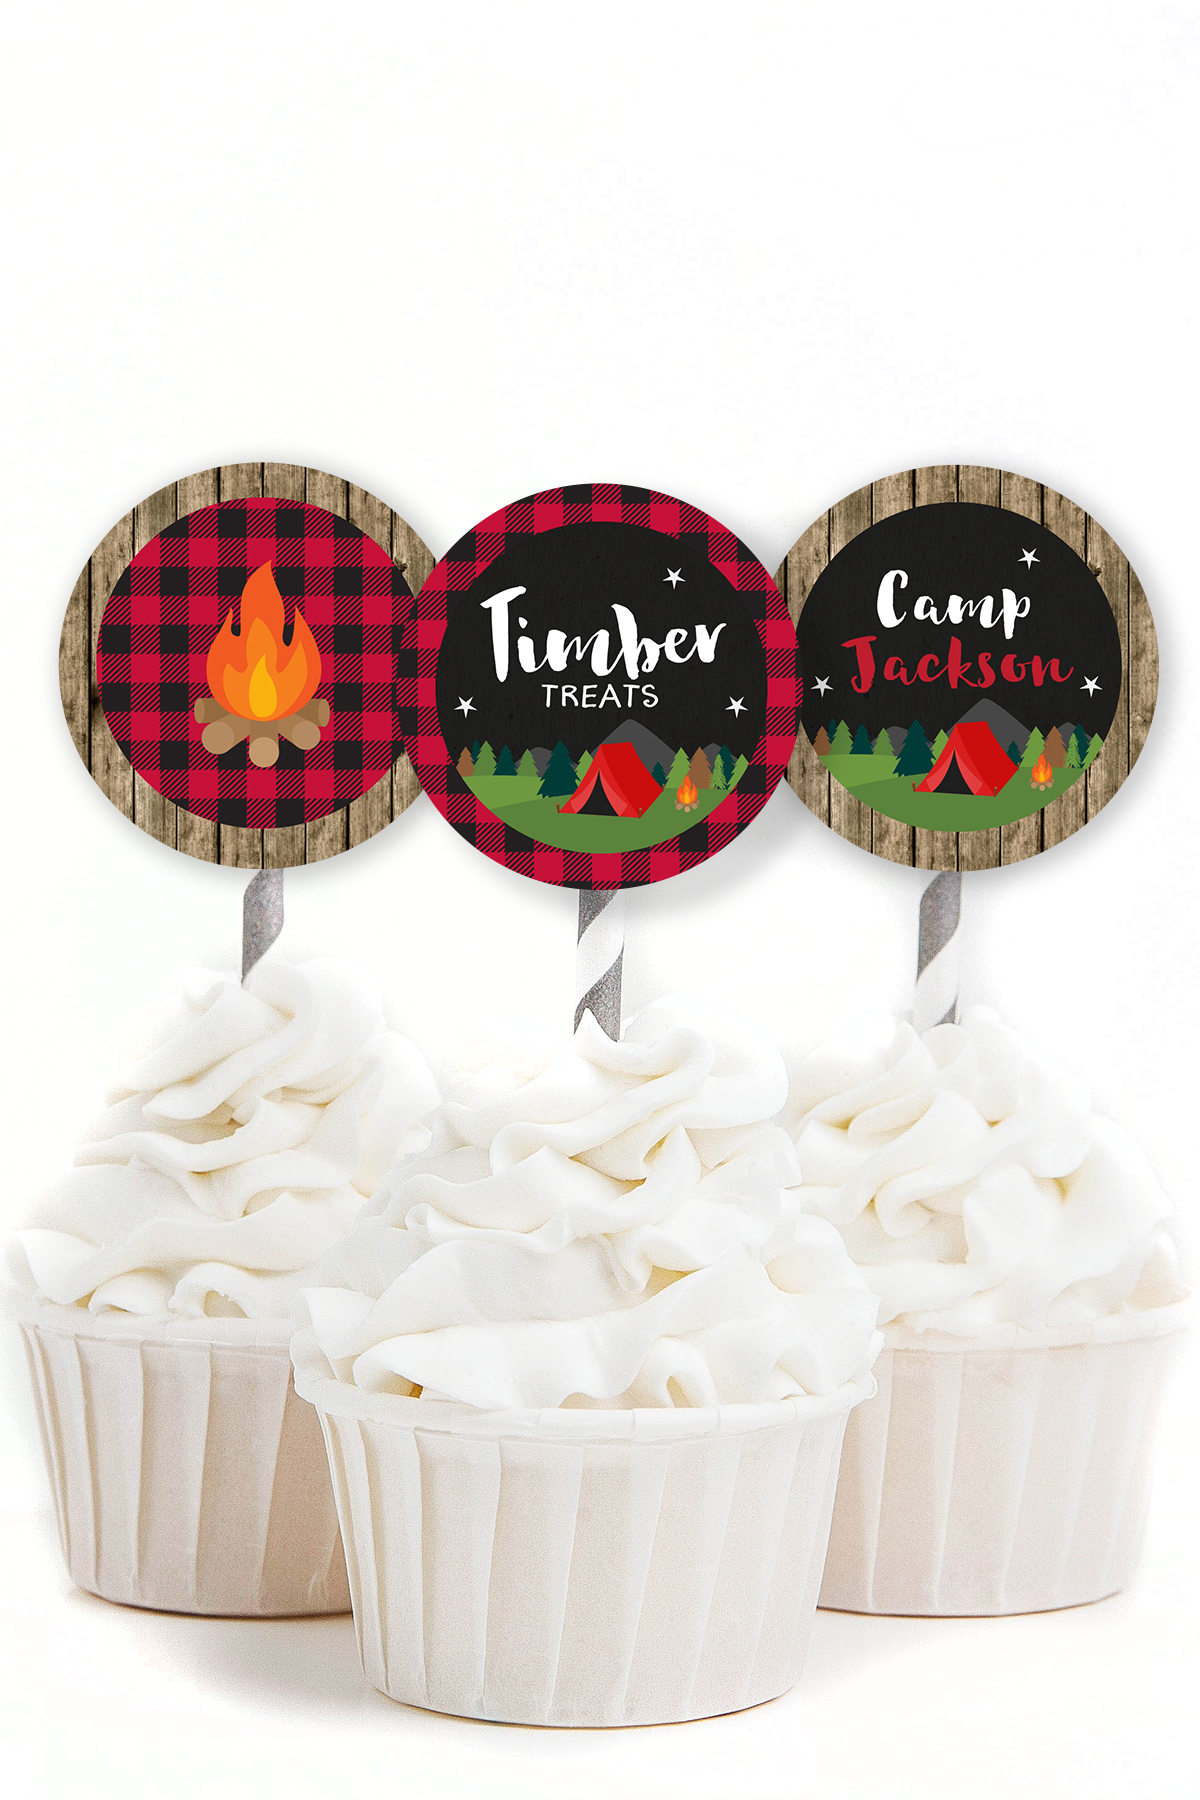 Camping party cupcake toppers. Designed by MKKM Designs